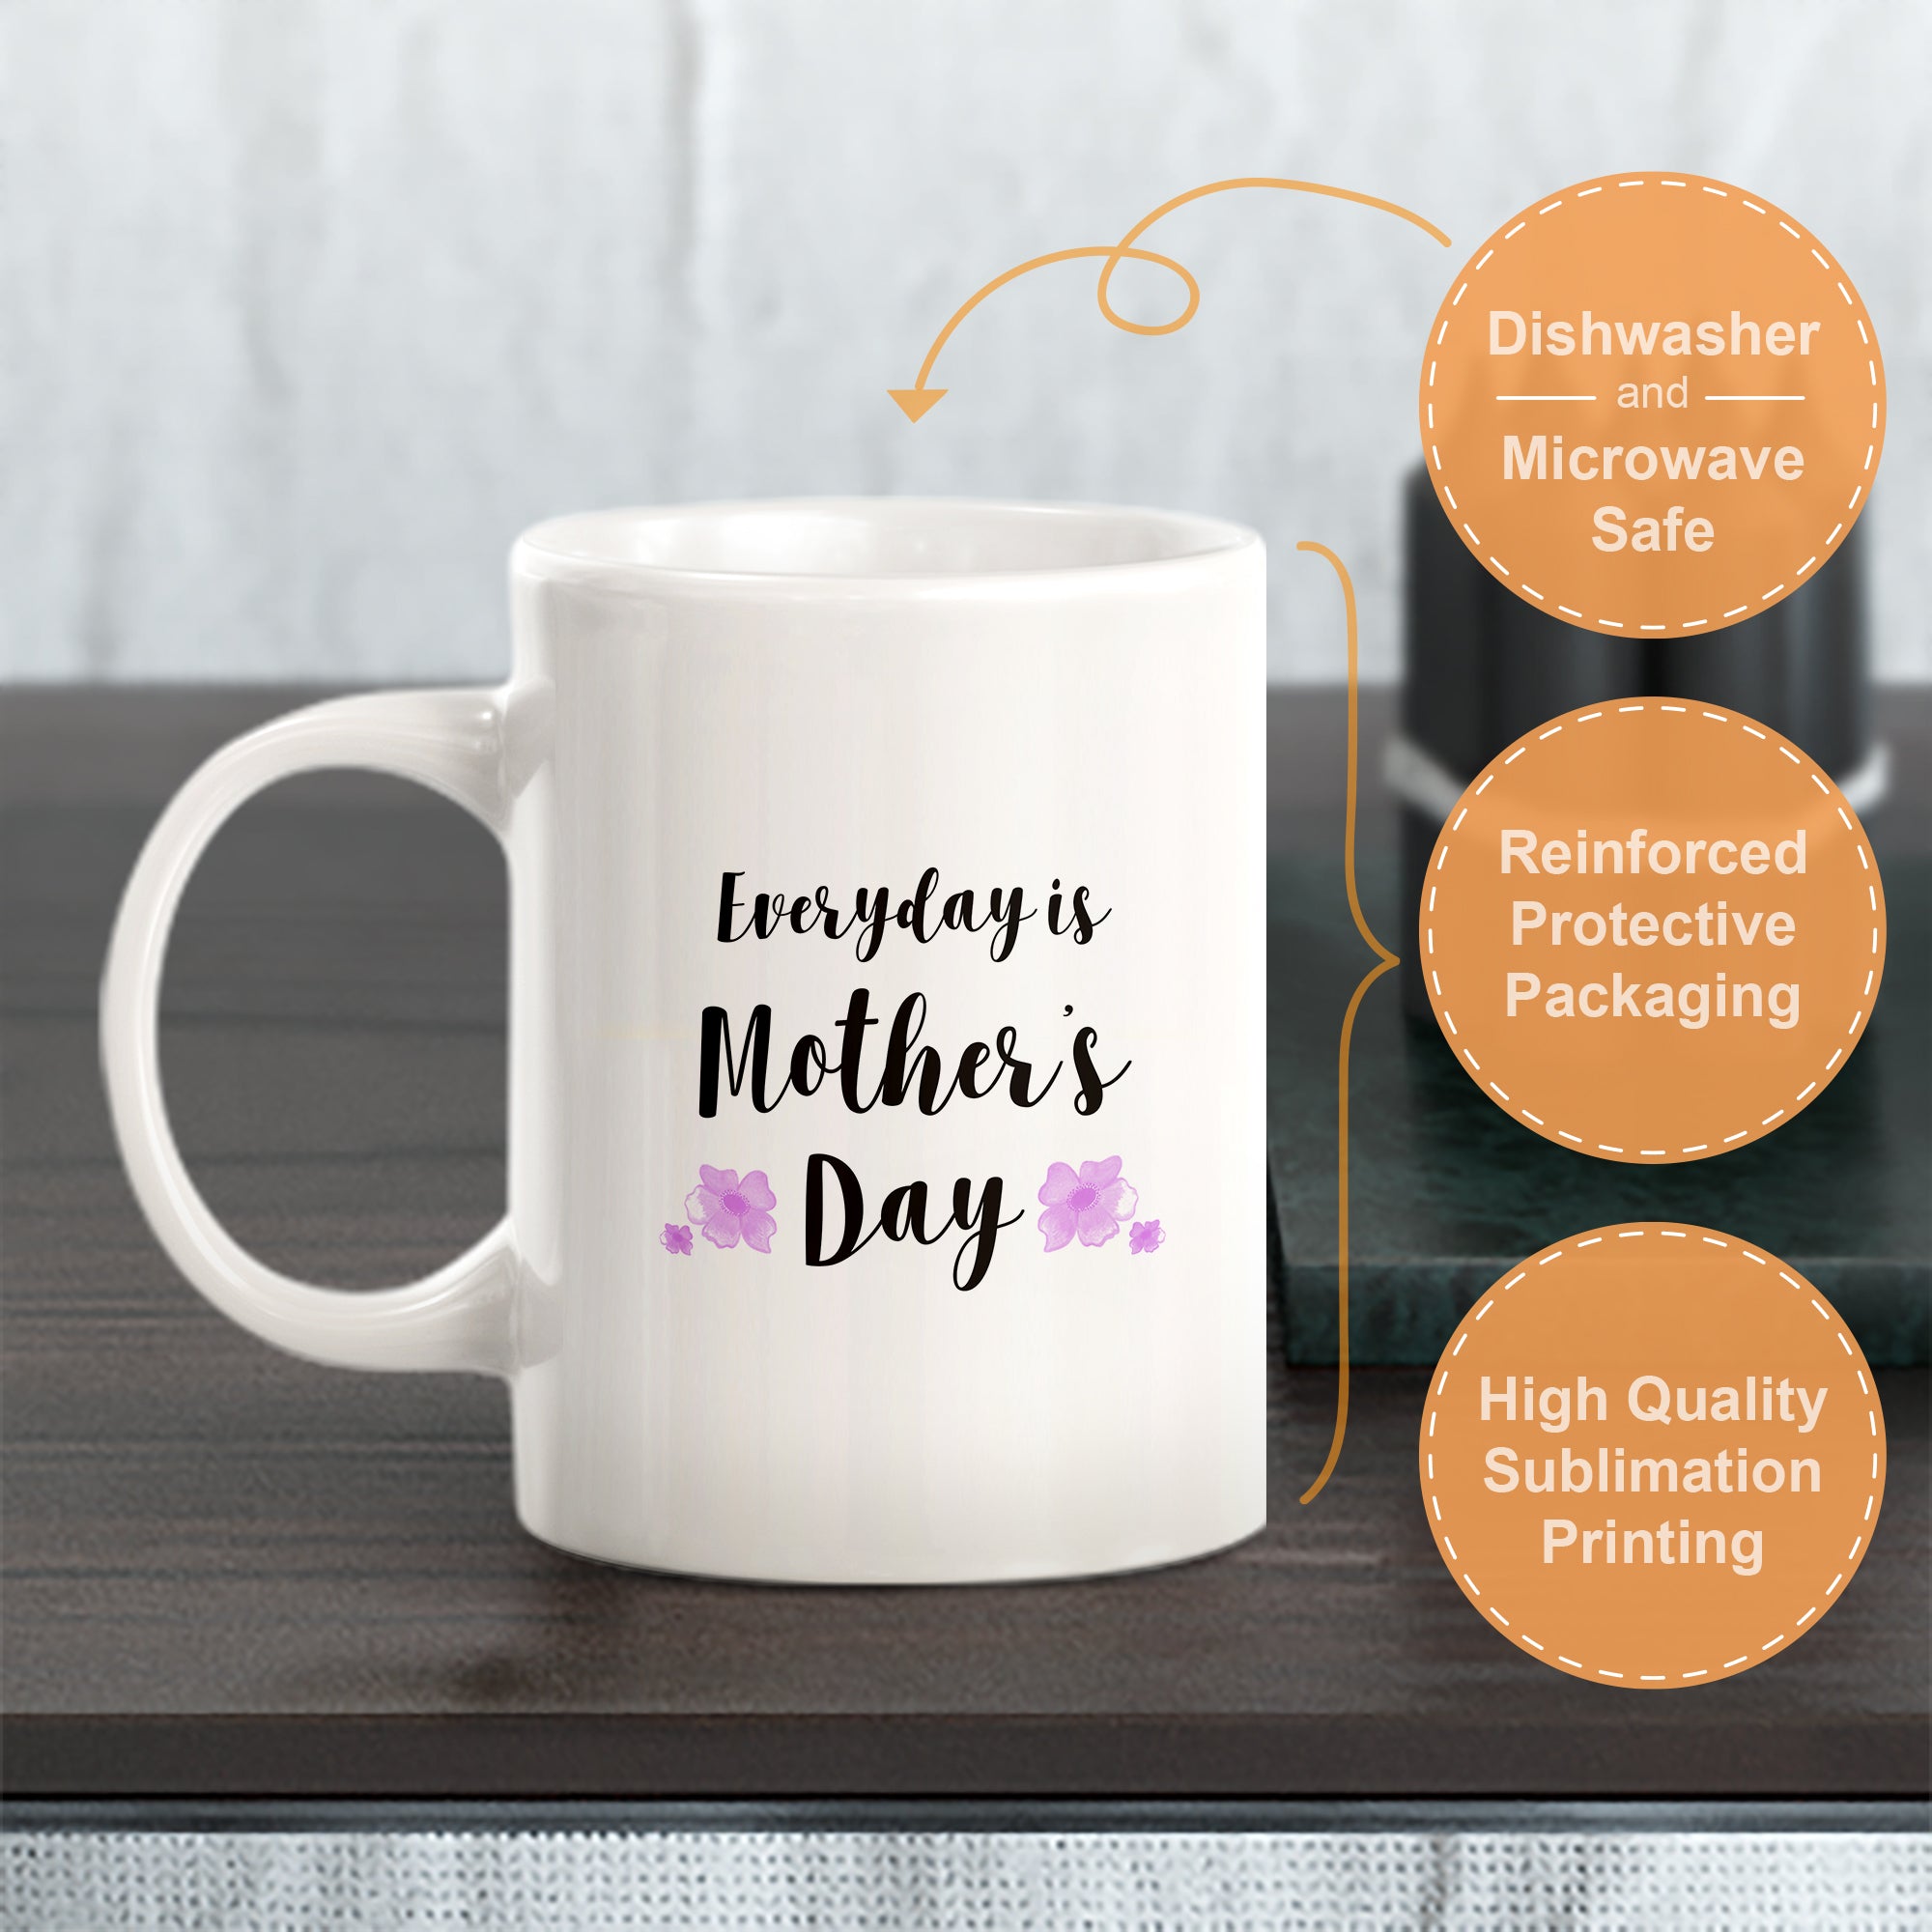 Every day is Mother's Day Coffee Mug